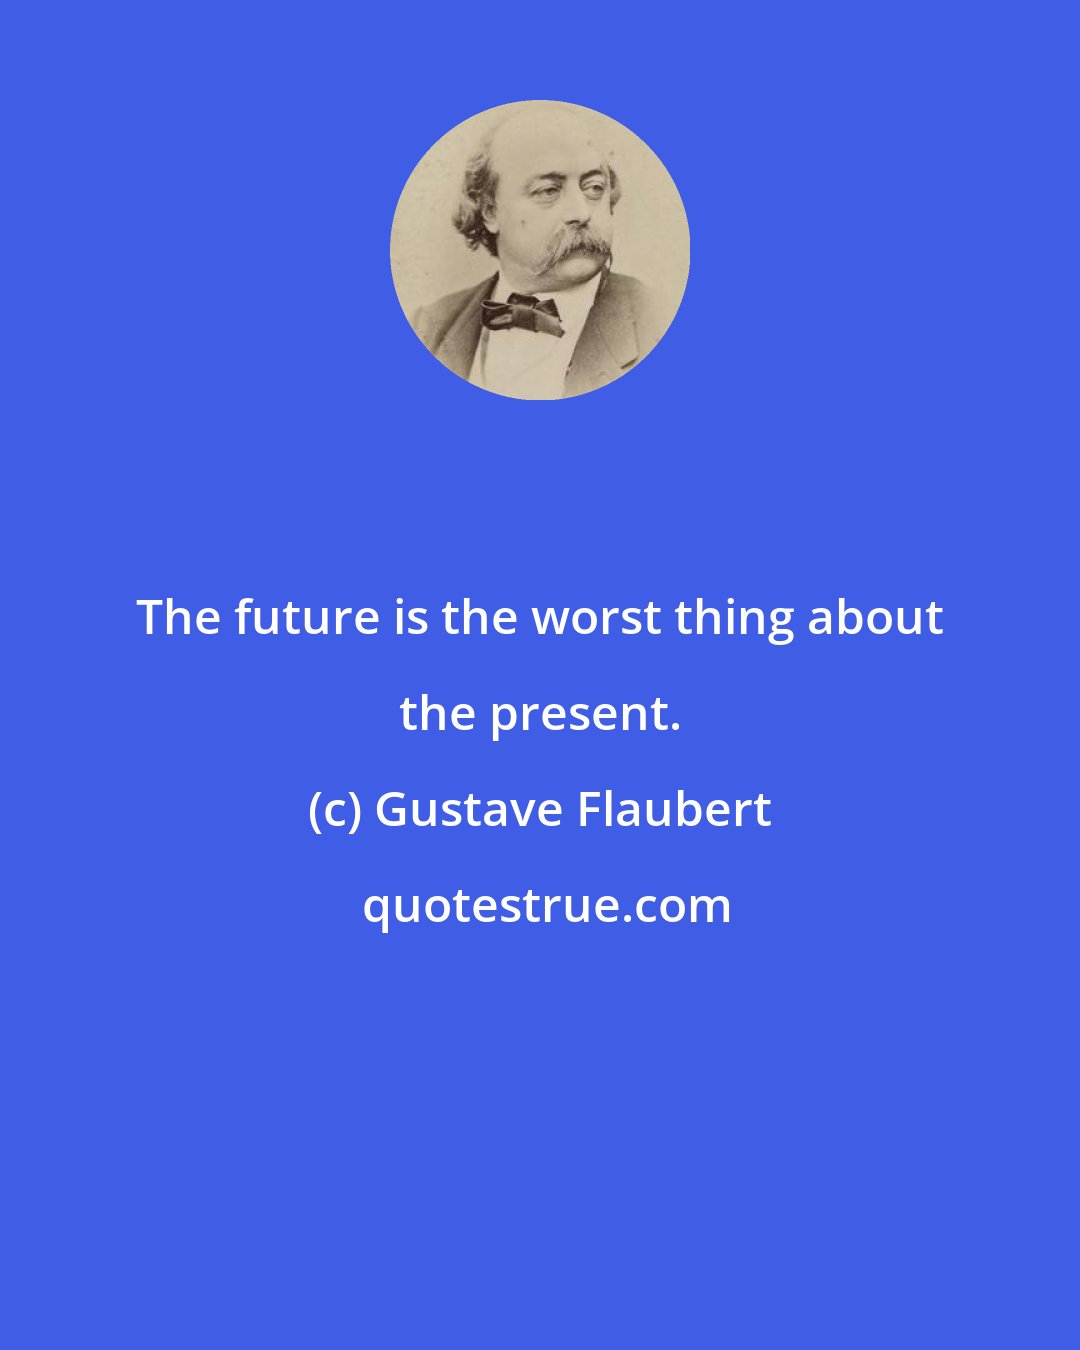 Gustave Flaubert: The future is the worst thing about the present.